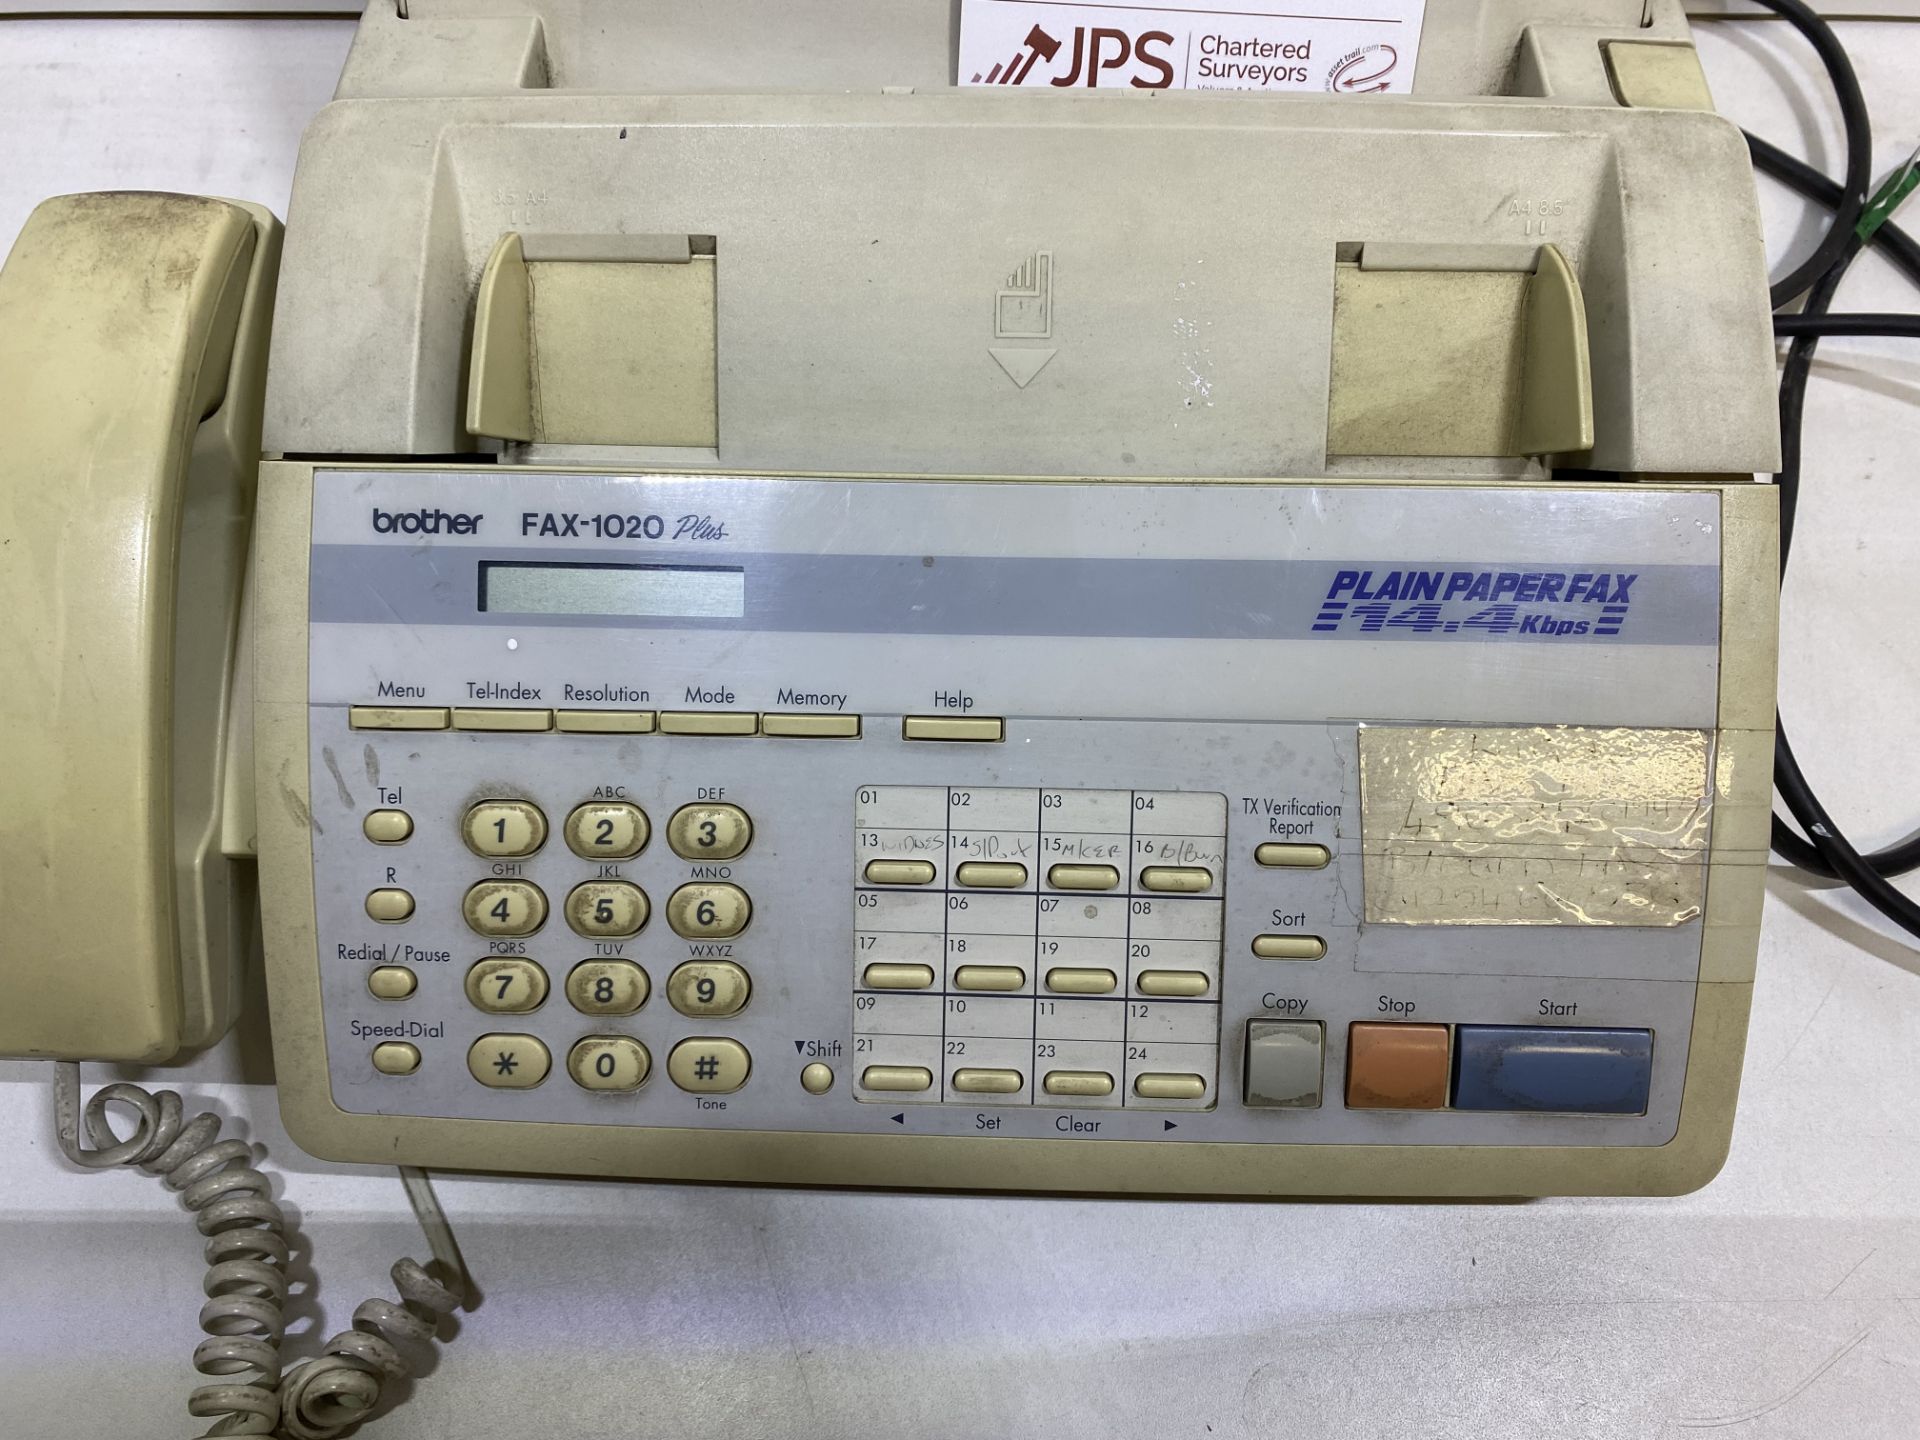 Brother FAX-1020 Plus Fax Machine - Image 3 of 7